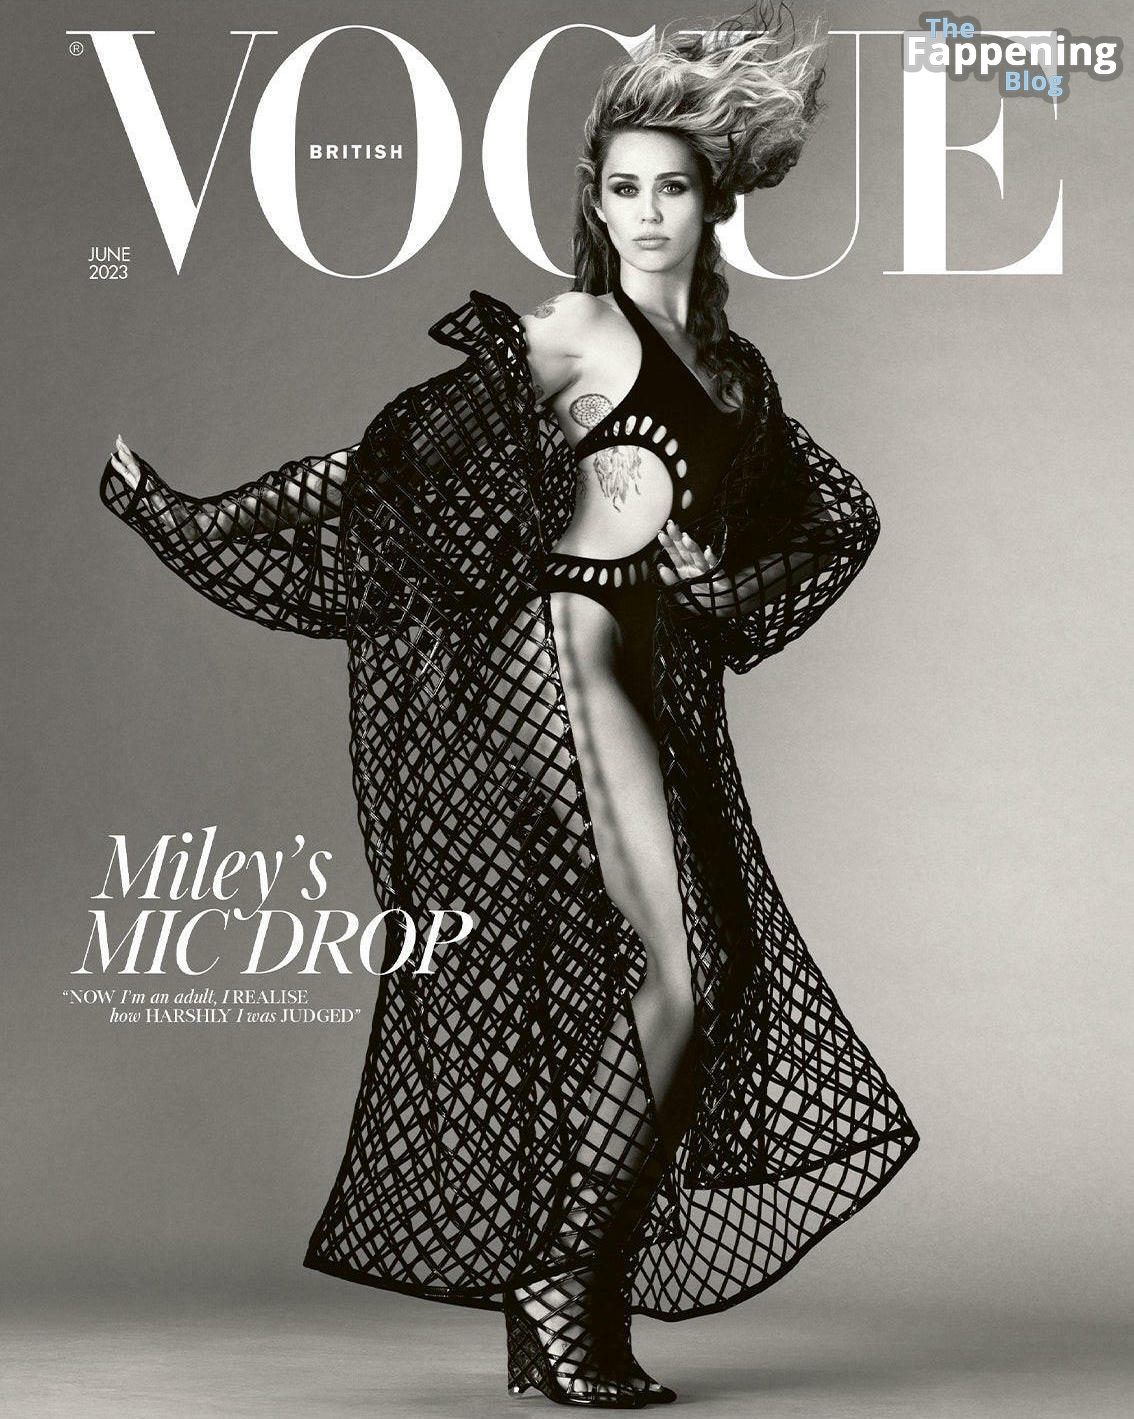 miley-cyrus-vogue-magazine-june-2023-sultry-glamour-3-thefappeningblog.com_.jpg